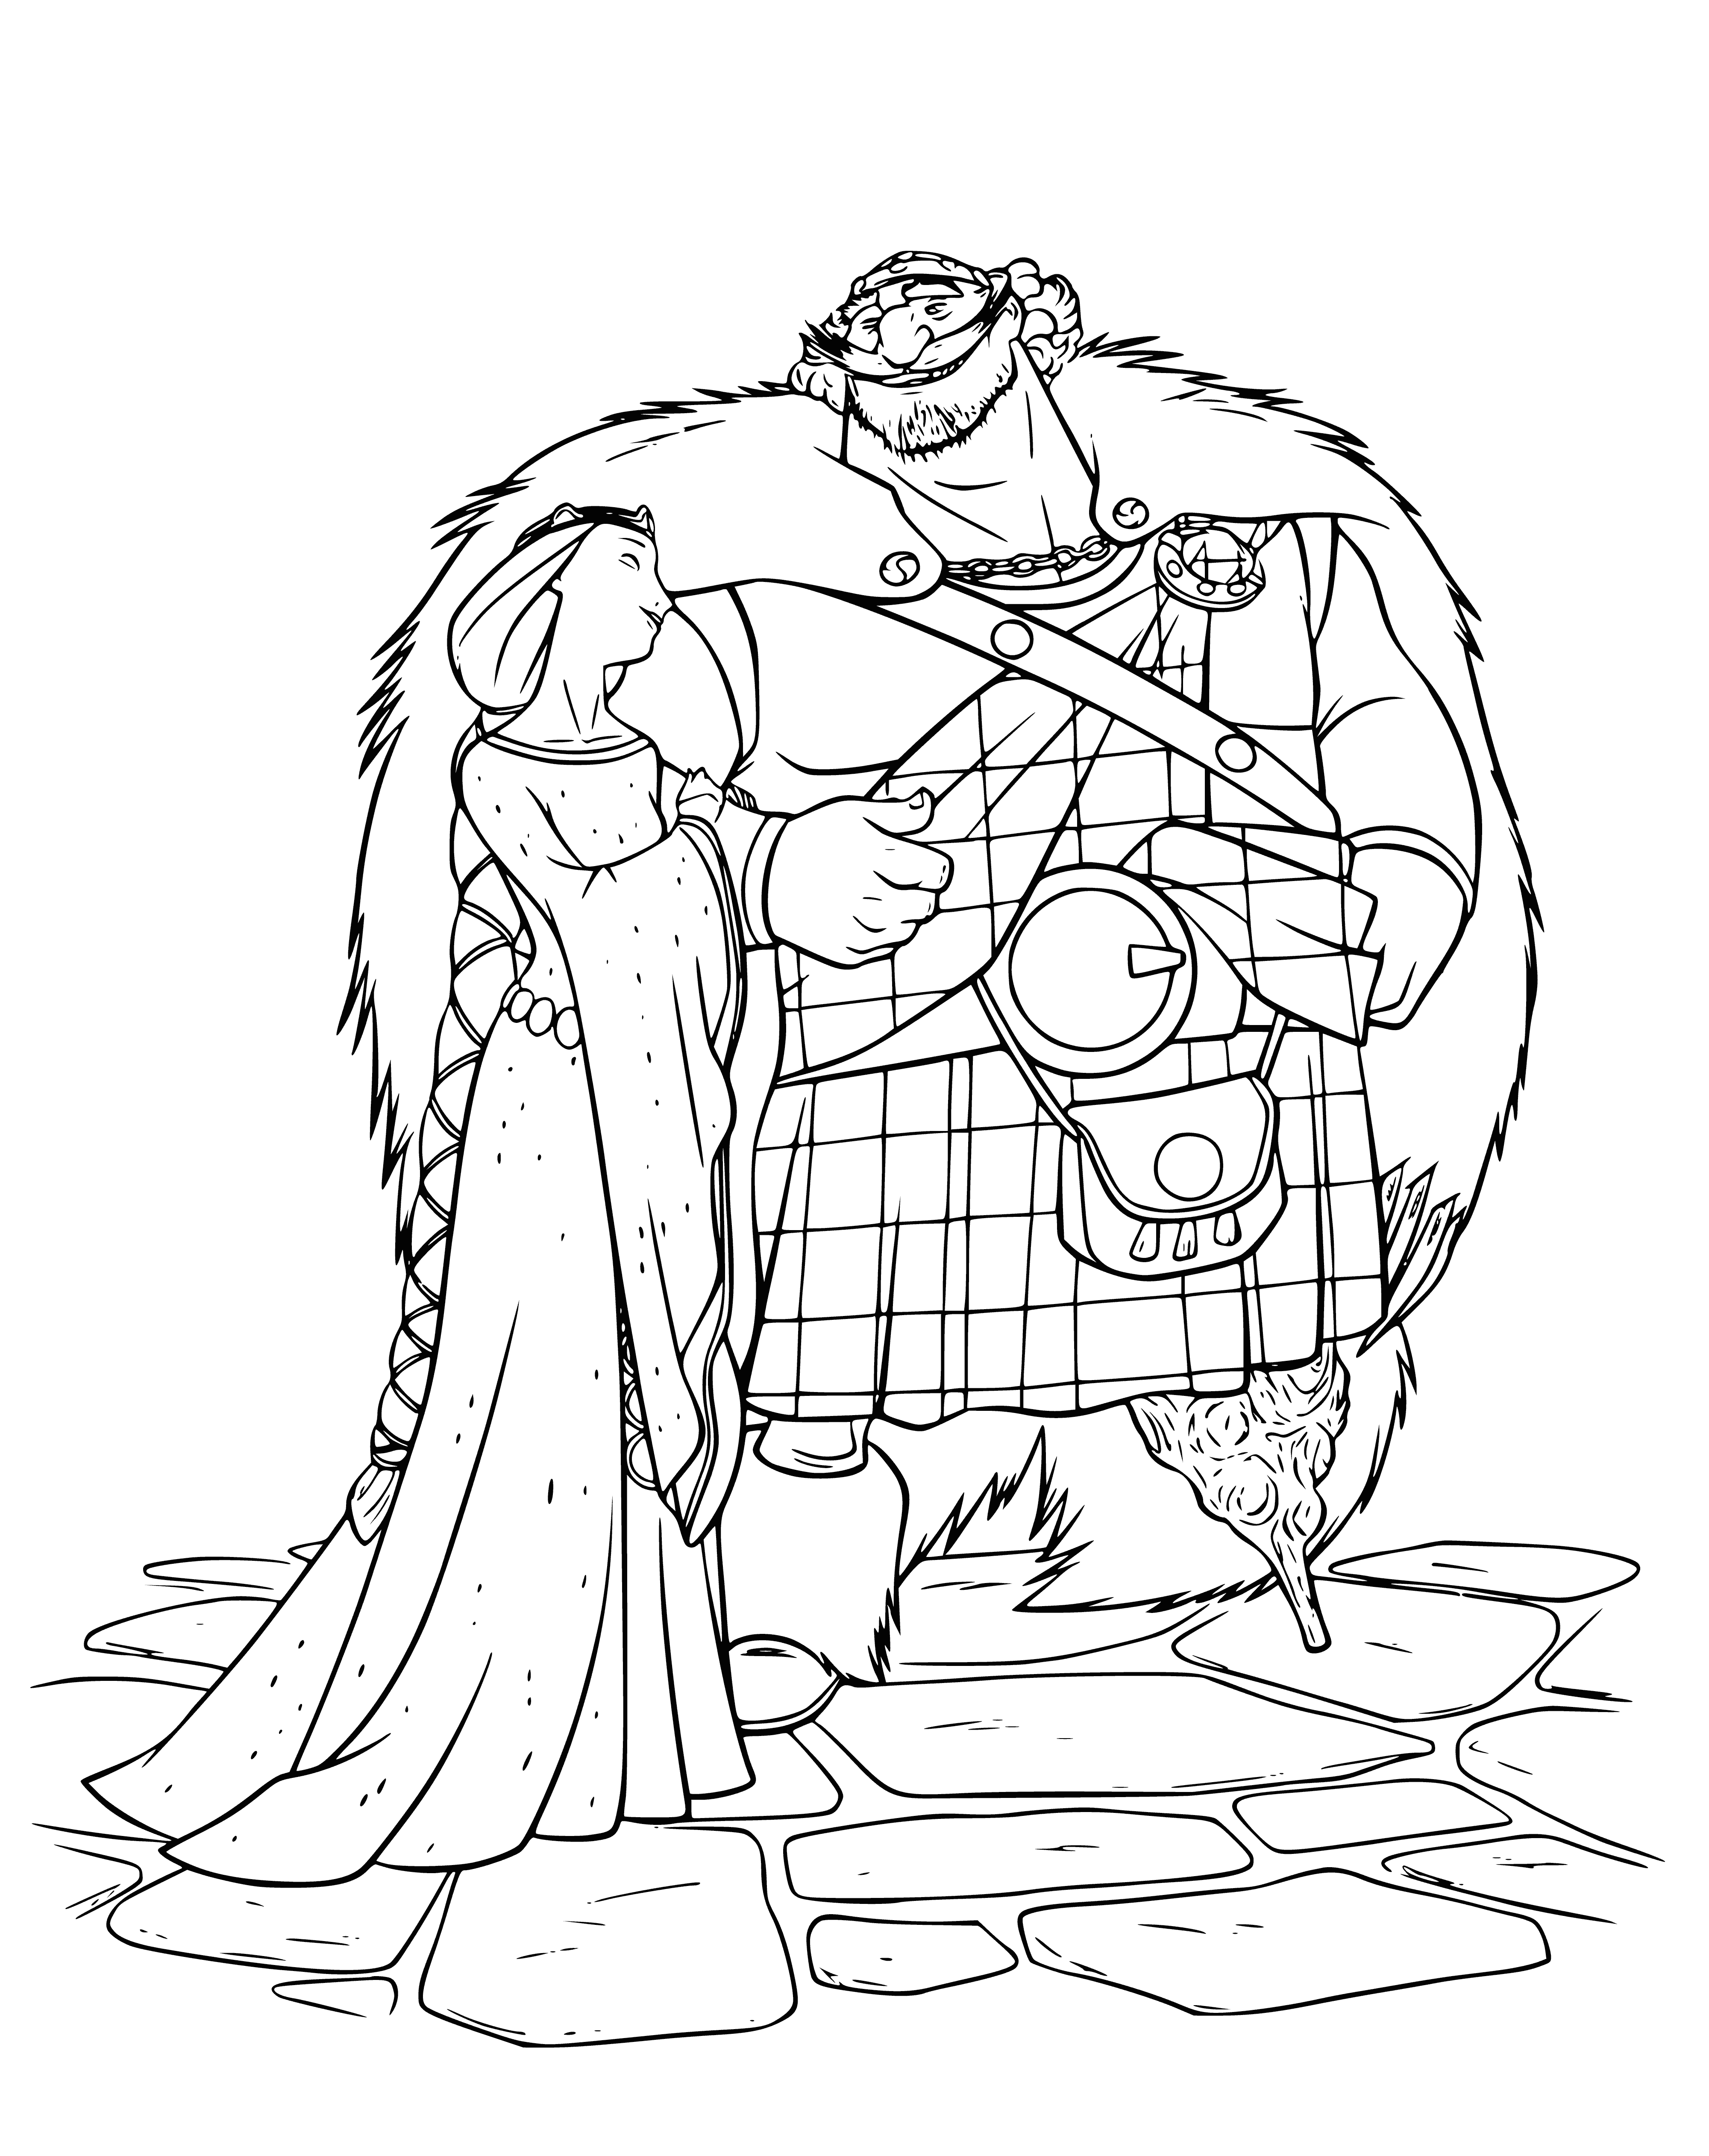 coloring page: Woman looks at a sword on a table, man in crown, blue cape in hall w/ stone floor, tapestries.